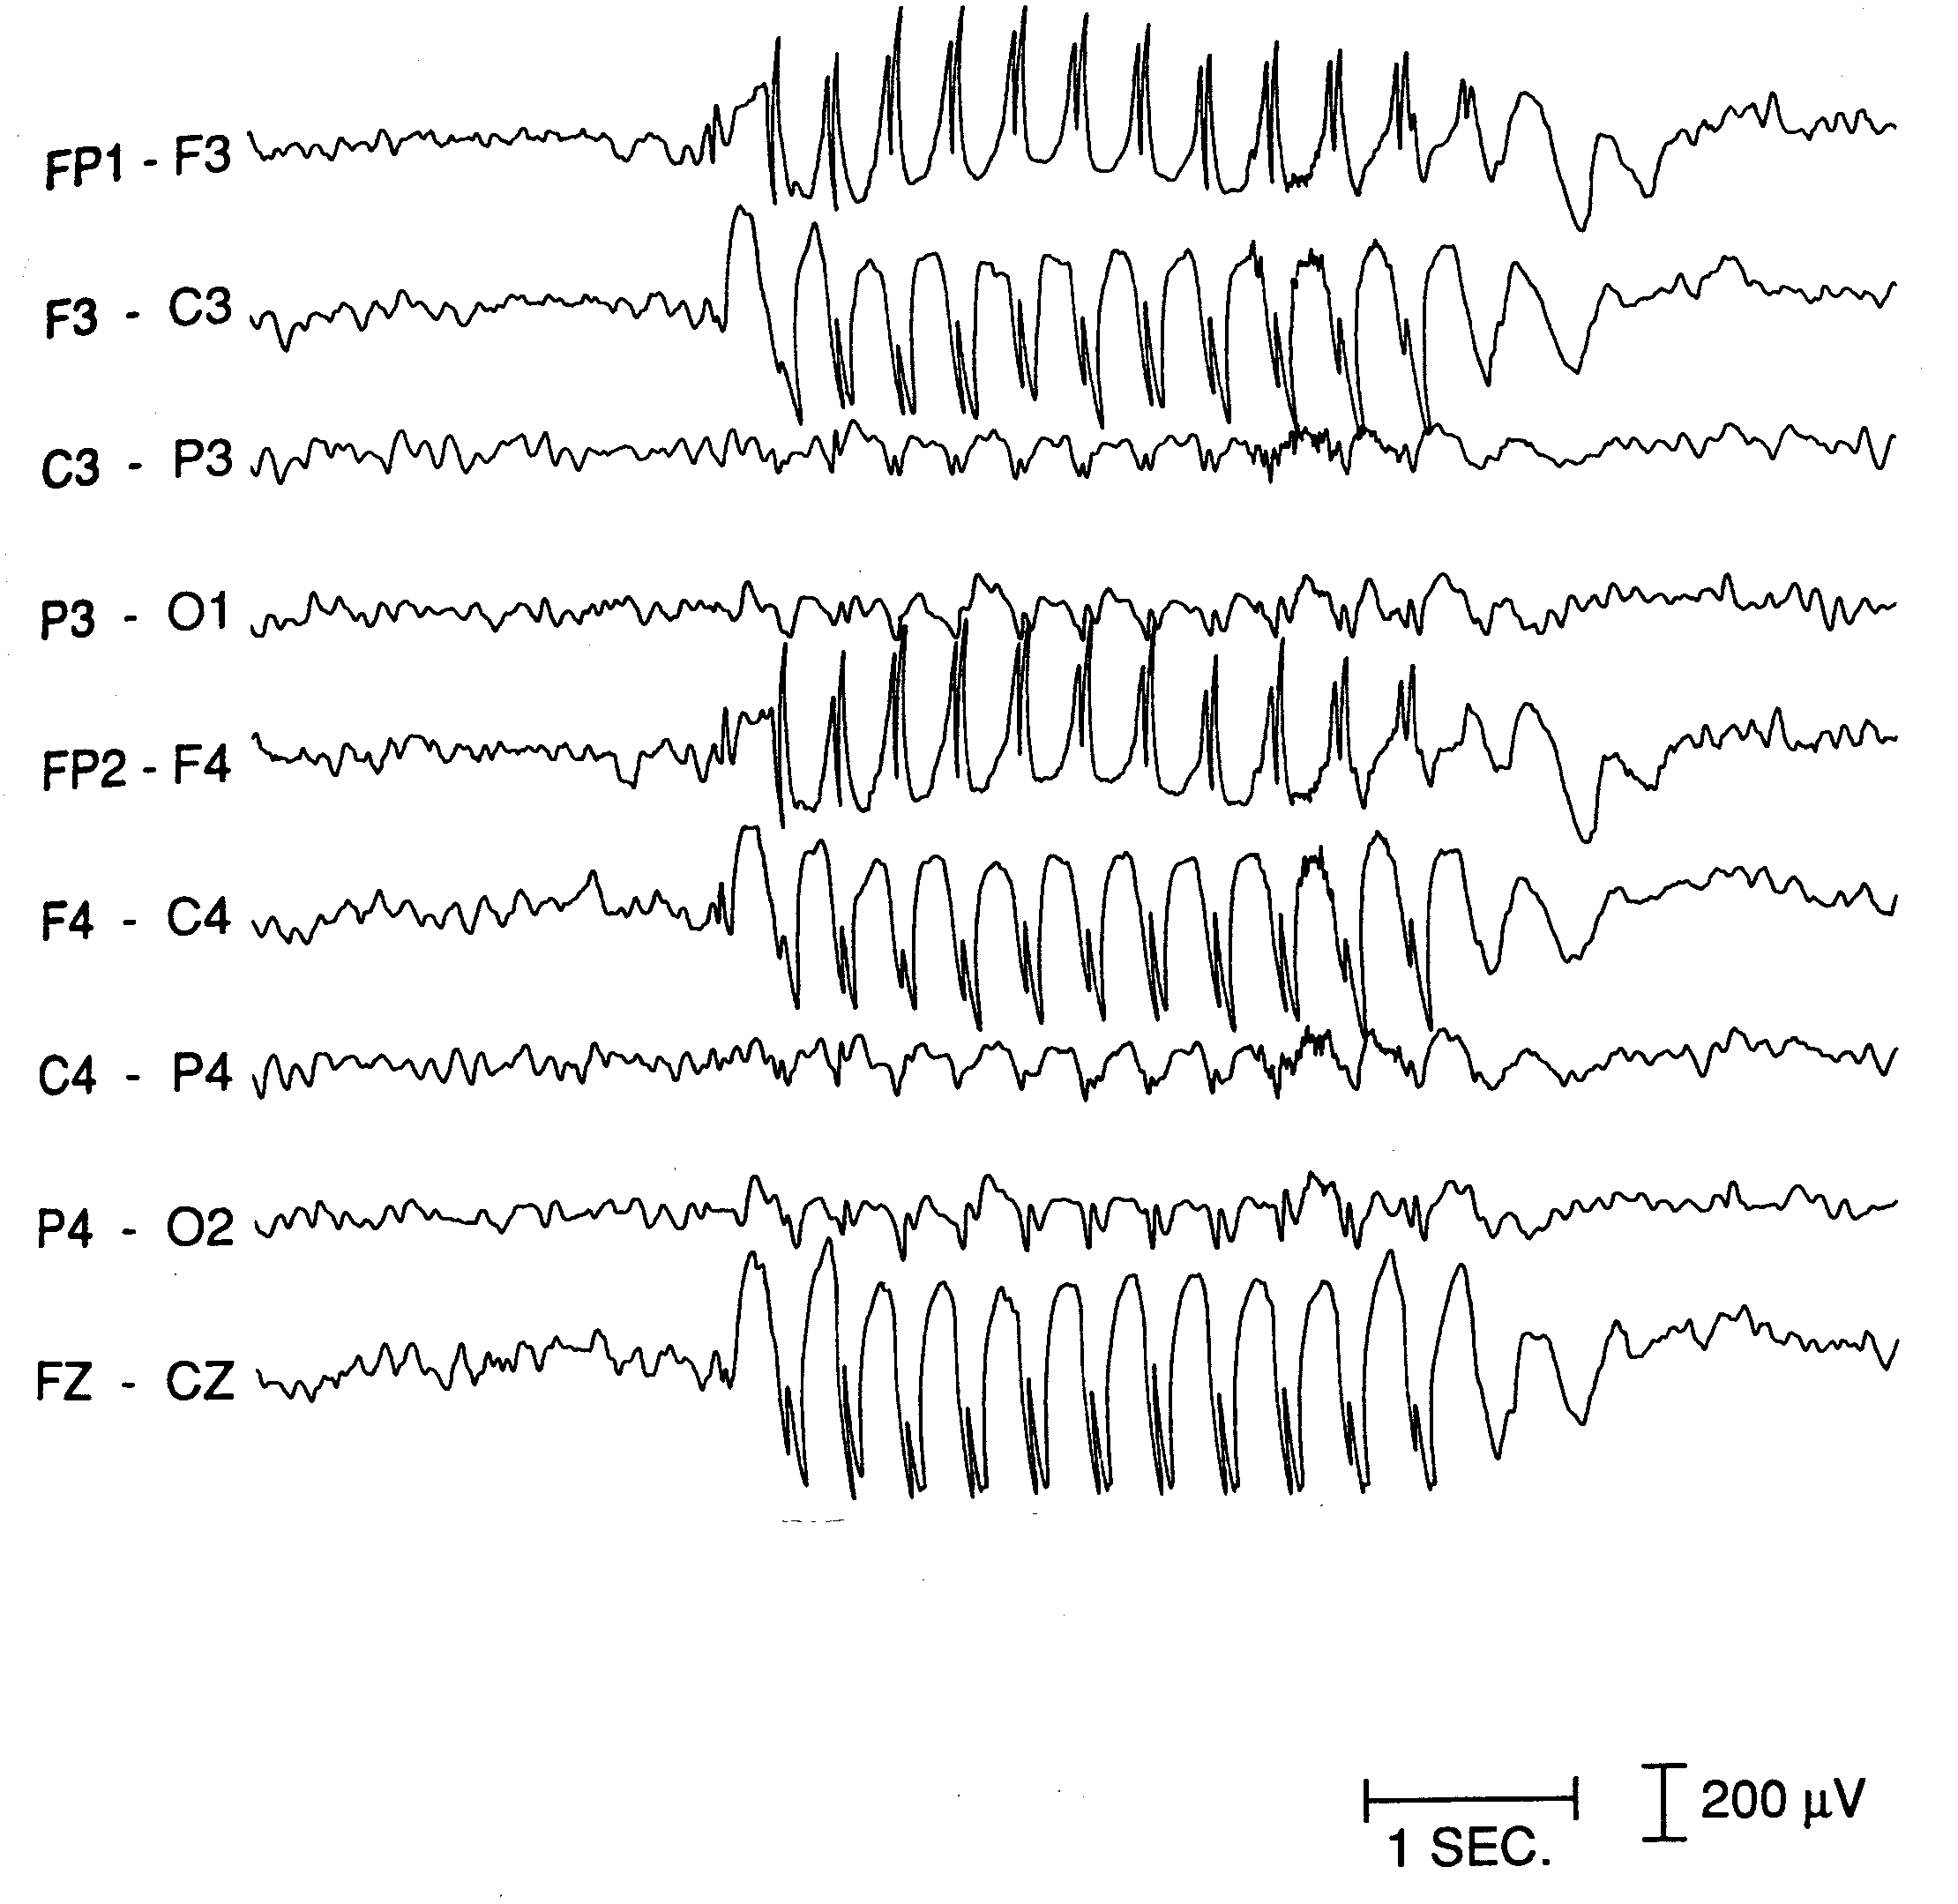 This EEG shows the characteristic absence seizure generalized pattern. There is an alternating "spike" and "wave" pattern that occurs 3 times a second (source)